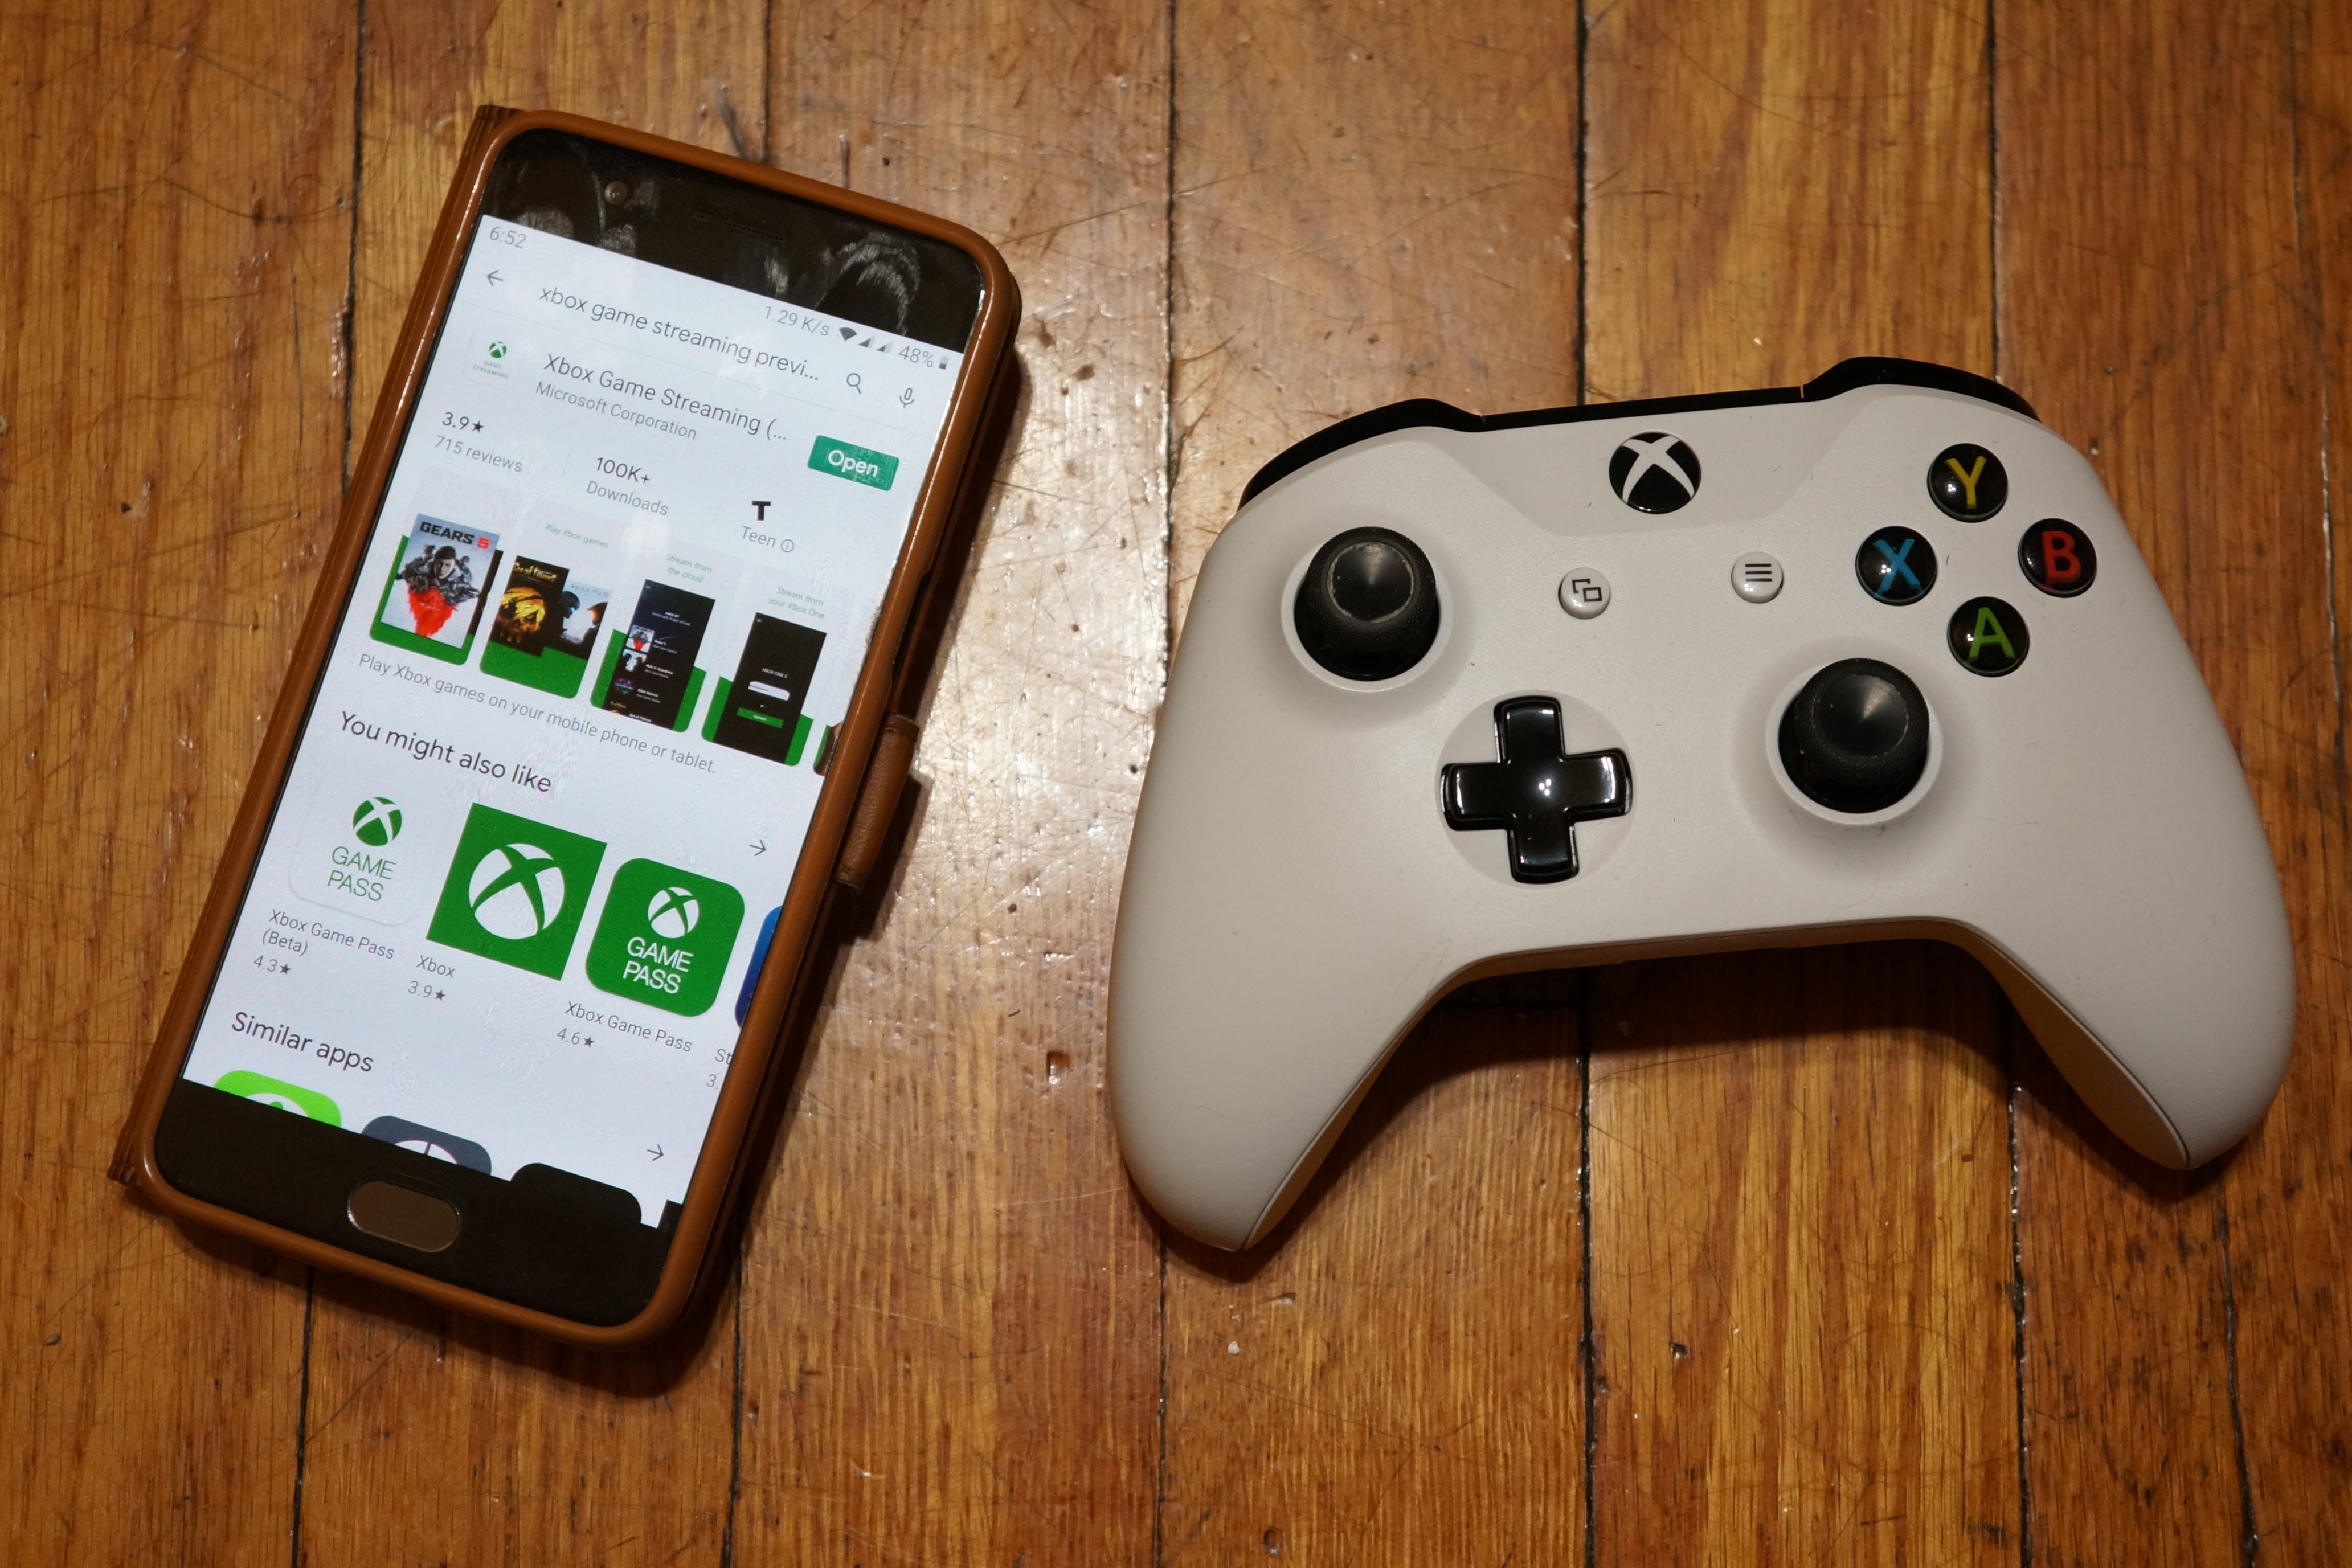 Nvidia Shield TV Pro - Xbox Gamepass Game Streaming ( XCloud ) Setup &  Overview 